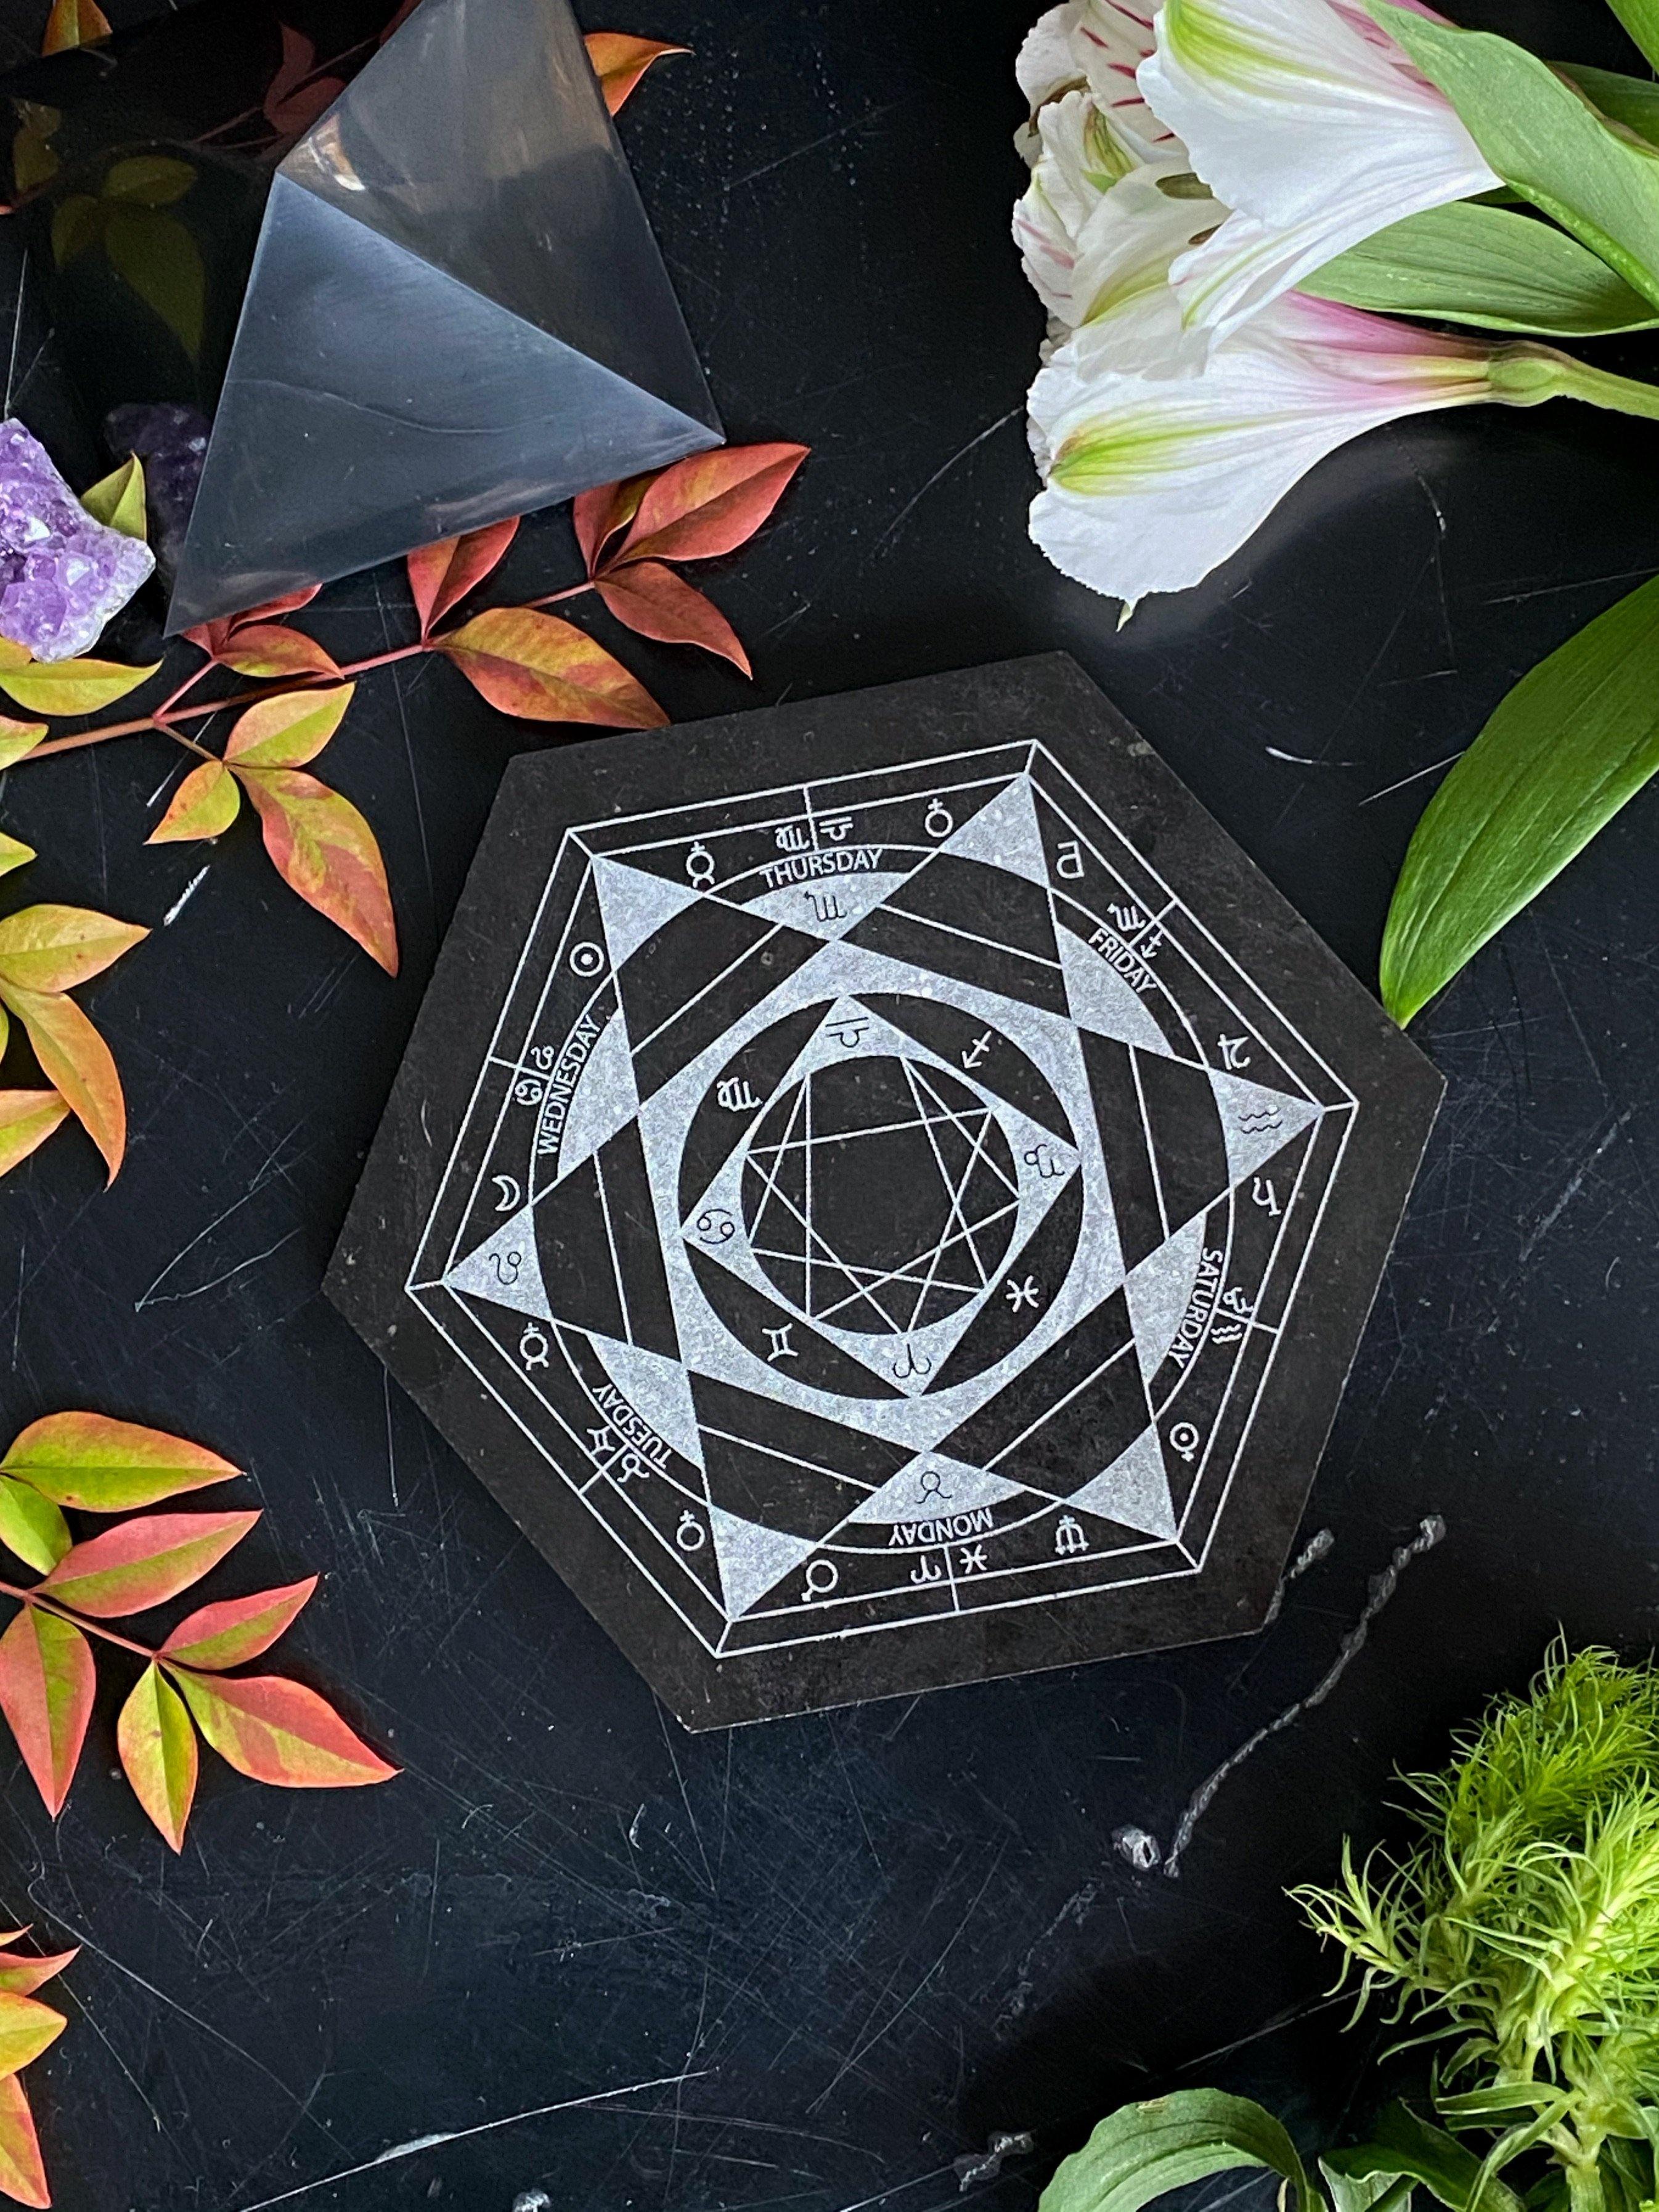 Black Marble Relic Tile for Altars, Crystal Grids, & Divination - Collectible Series - Keven Craft Rituals